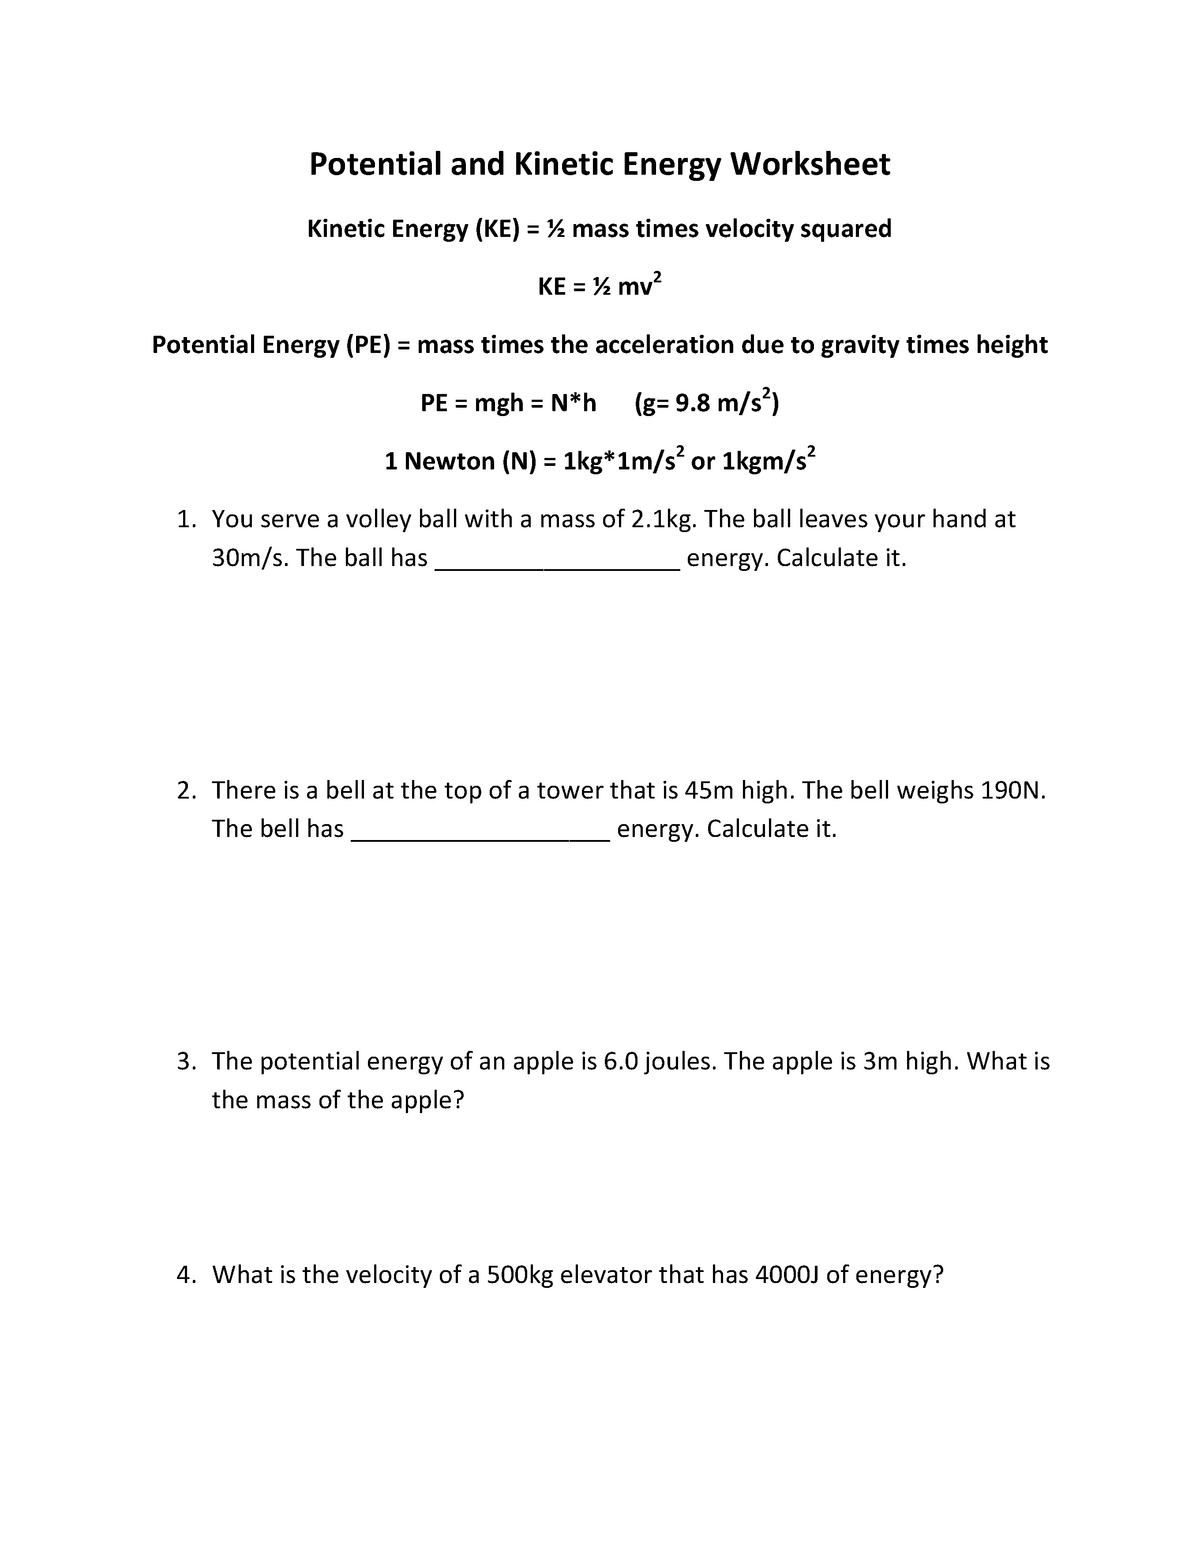 Potential and Kinetic Energy Worksheet - science - 20 - UAEU Throughout Work And Energy Worksheet Answers